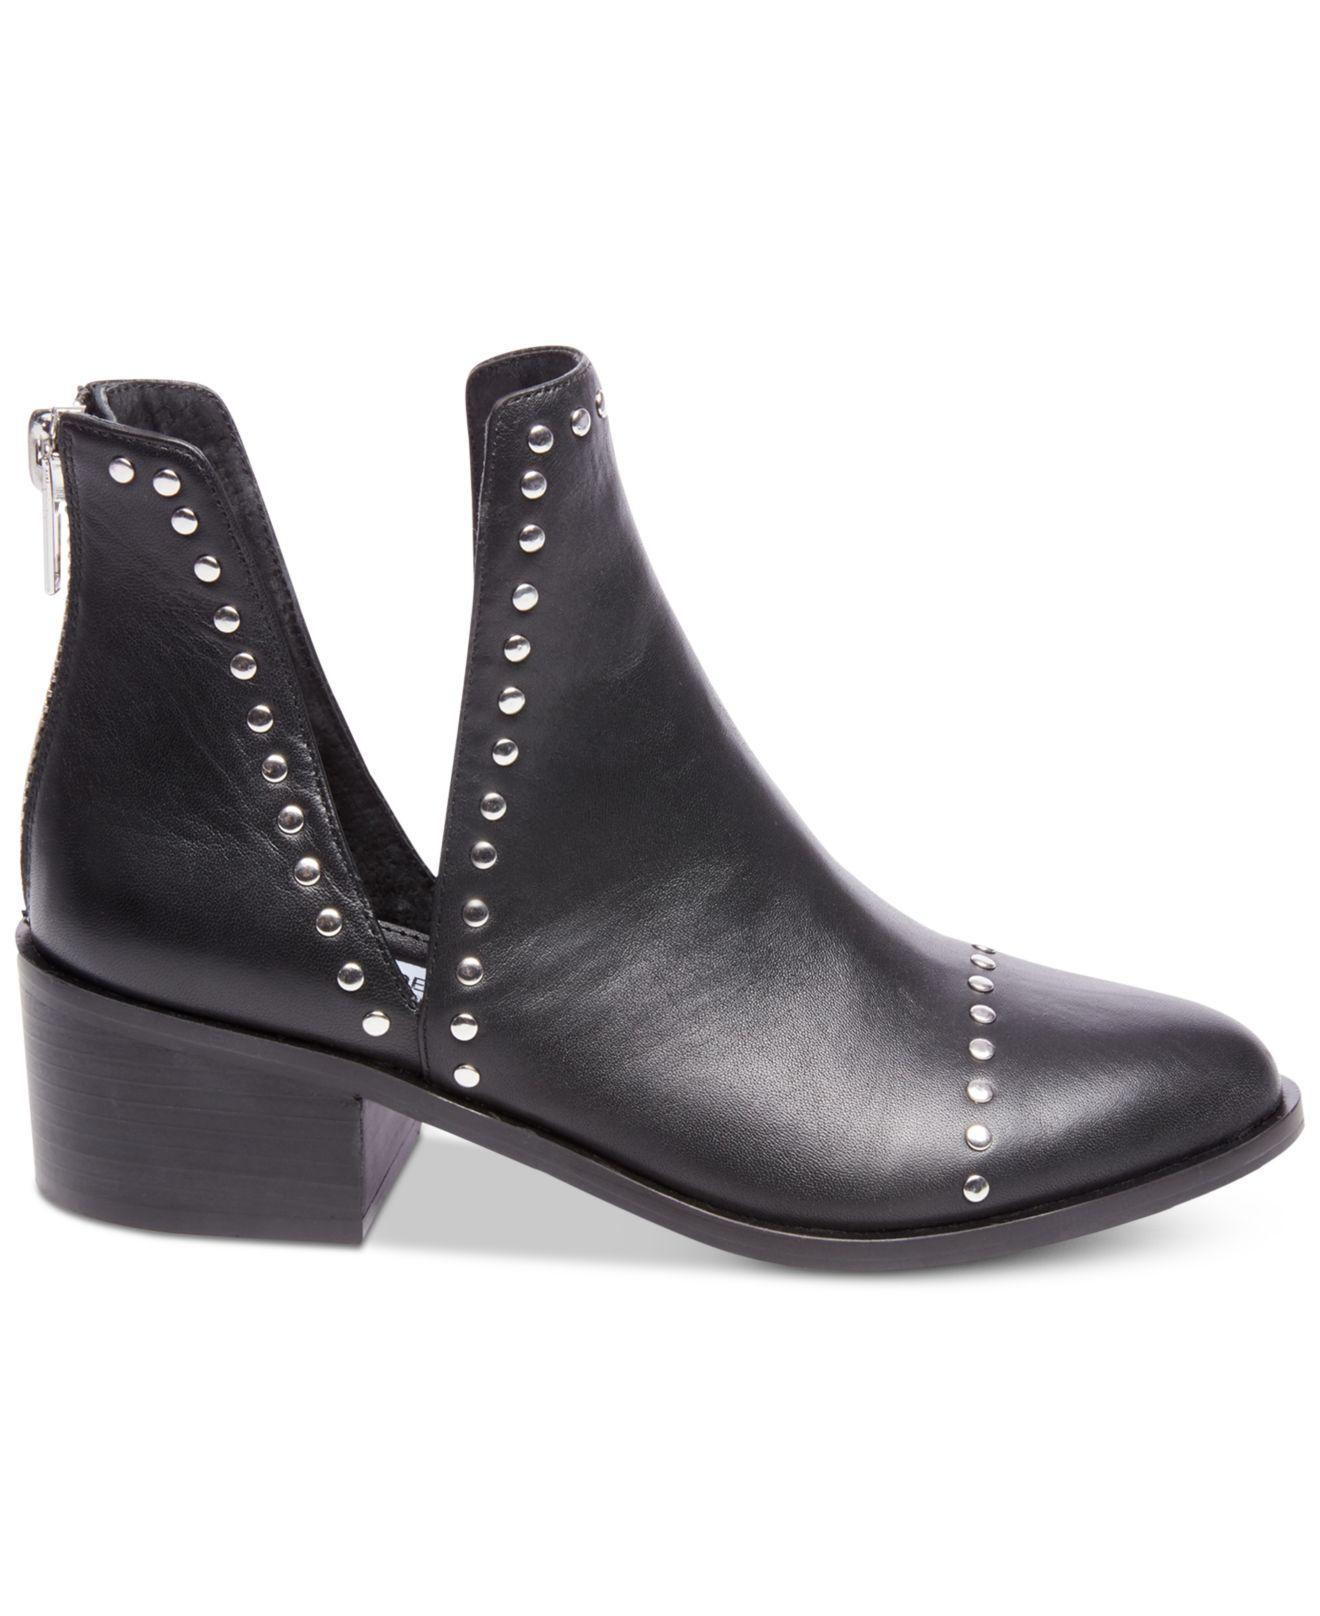 Lyst - Steve Madden Conspire Booties in Black - Save 53.211009174311926%